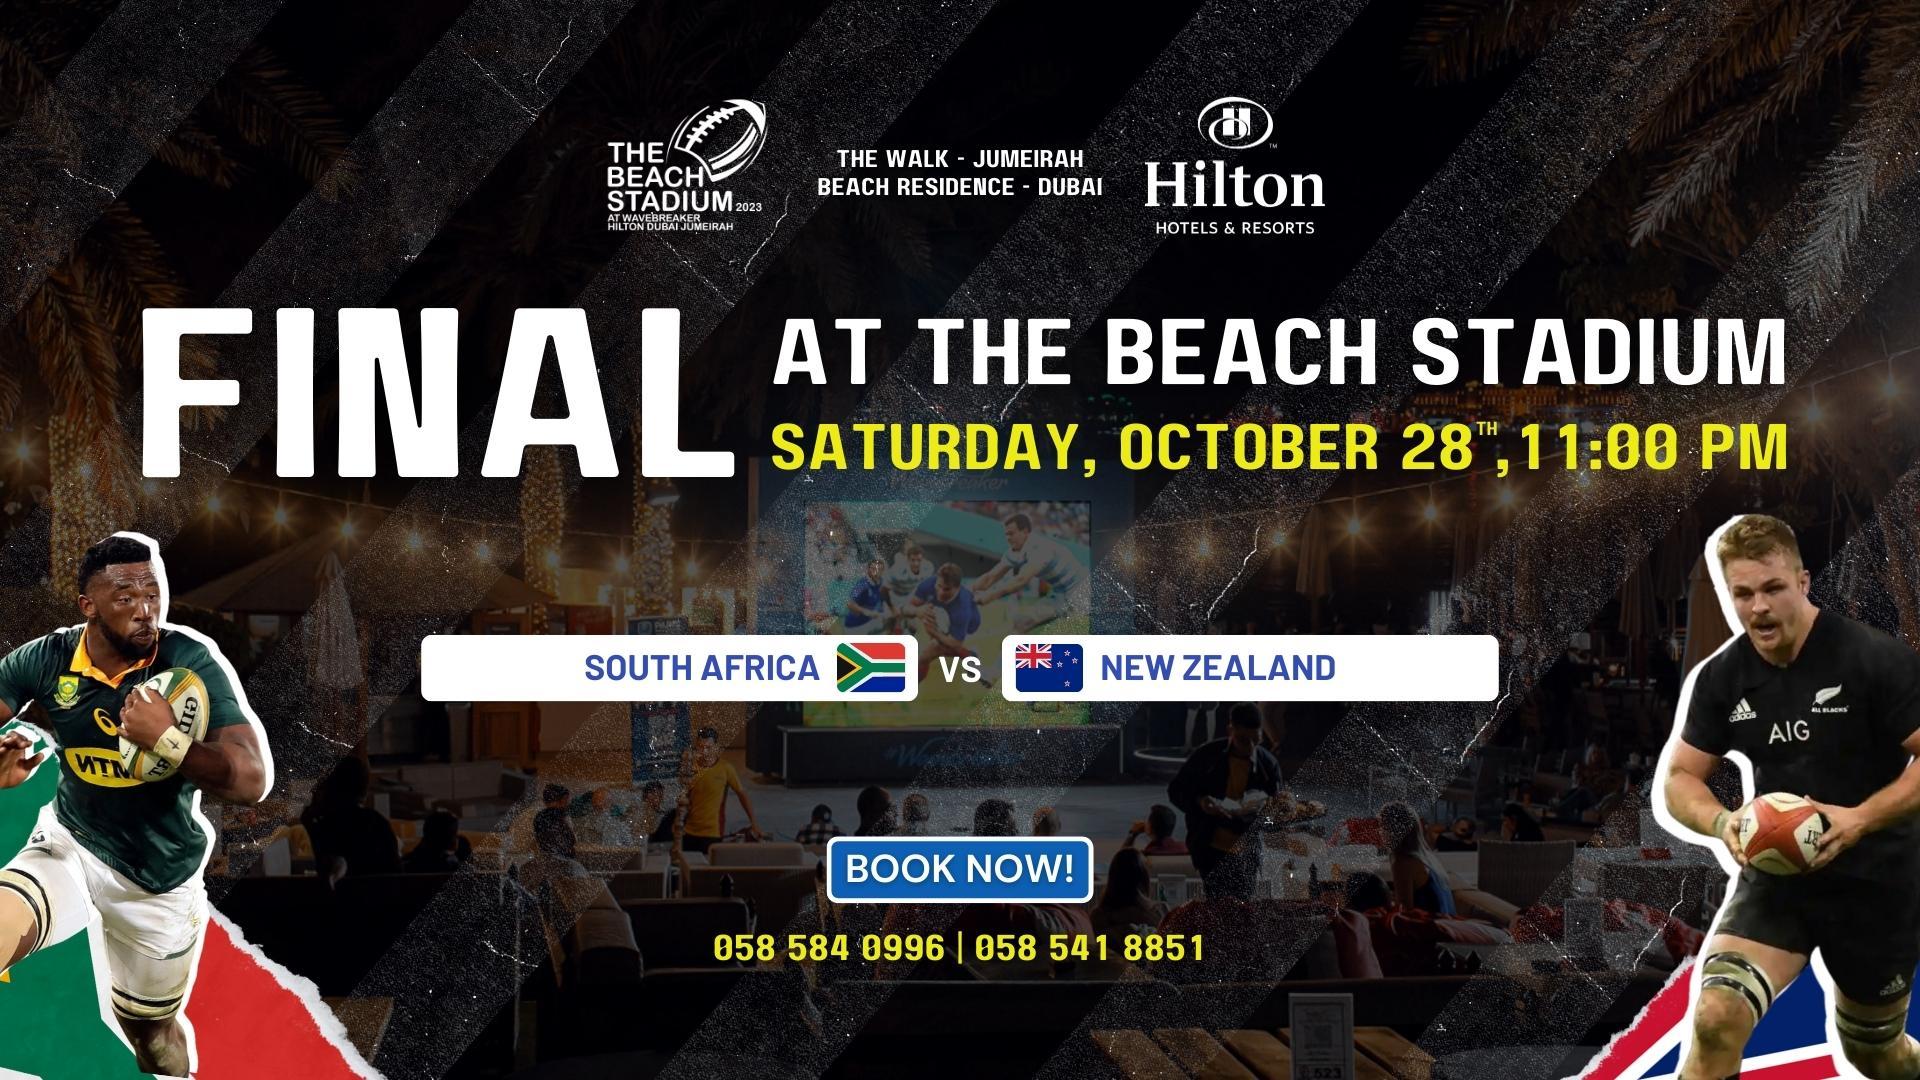 South Africa vs. New Zealand in Rugby World Cup 2023 Finals at Wavebreaker, Hilton Dubai Jumeirah!